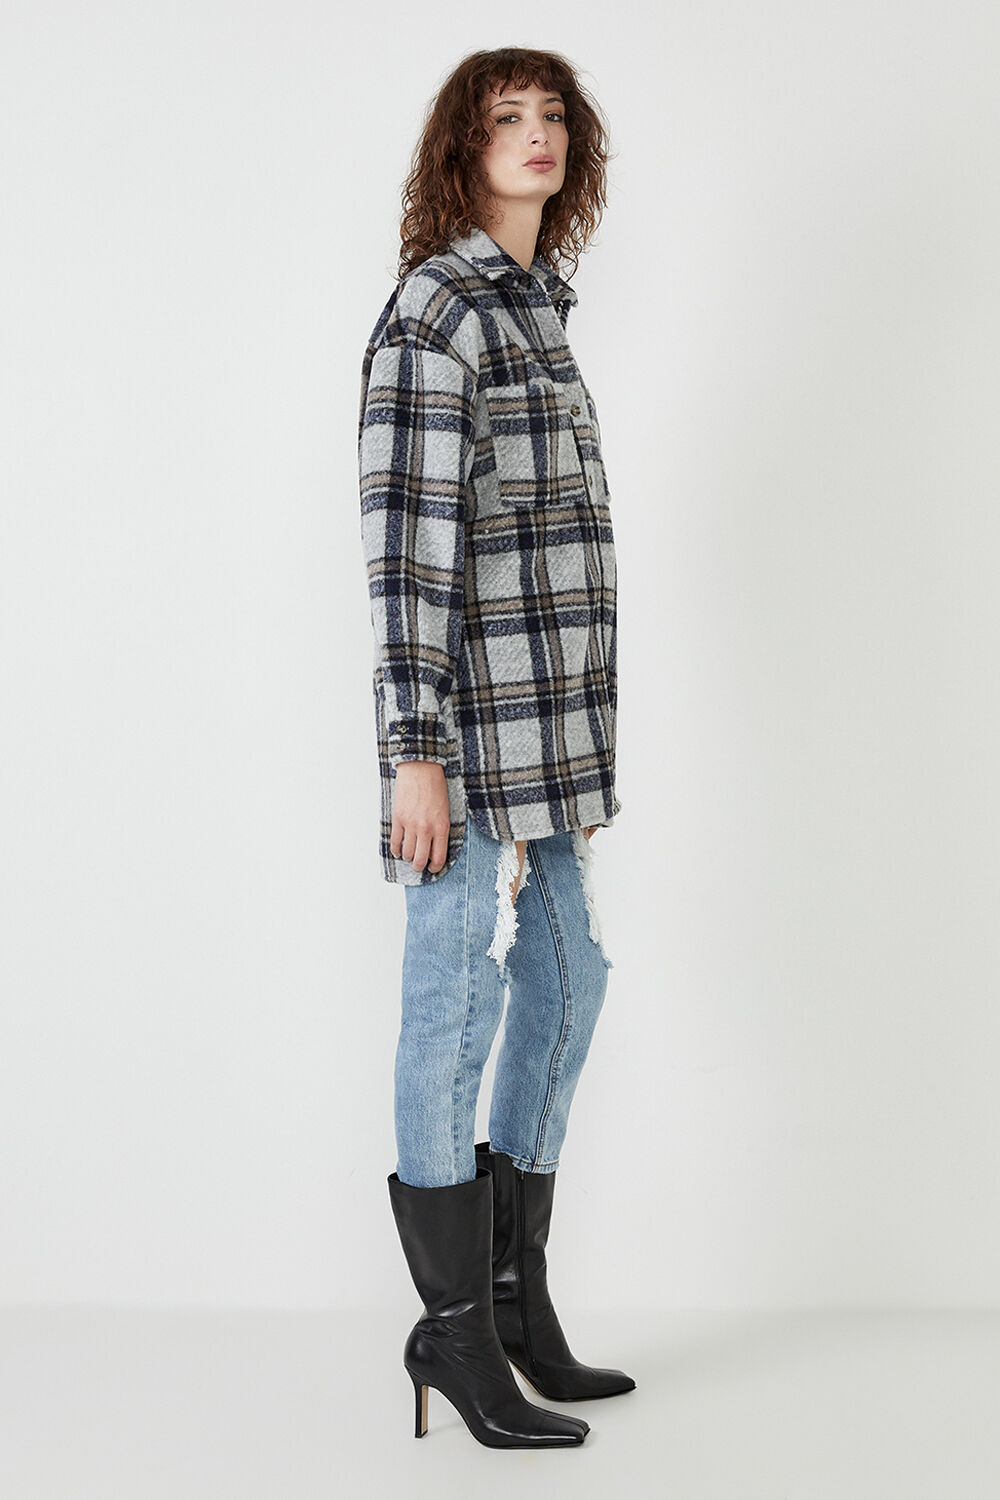 Checked Flannel Shirt in Blue Check   Bardot